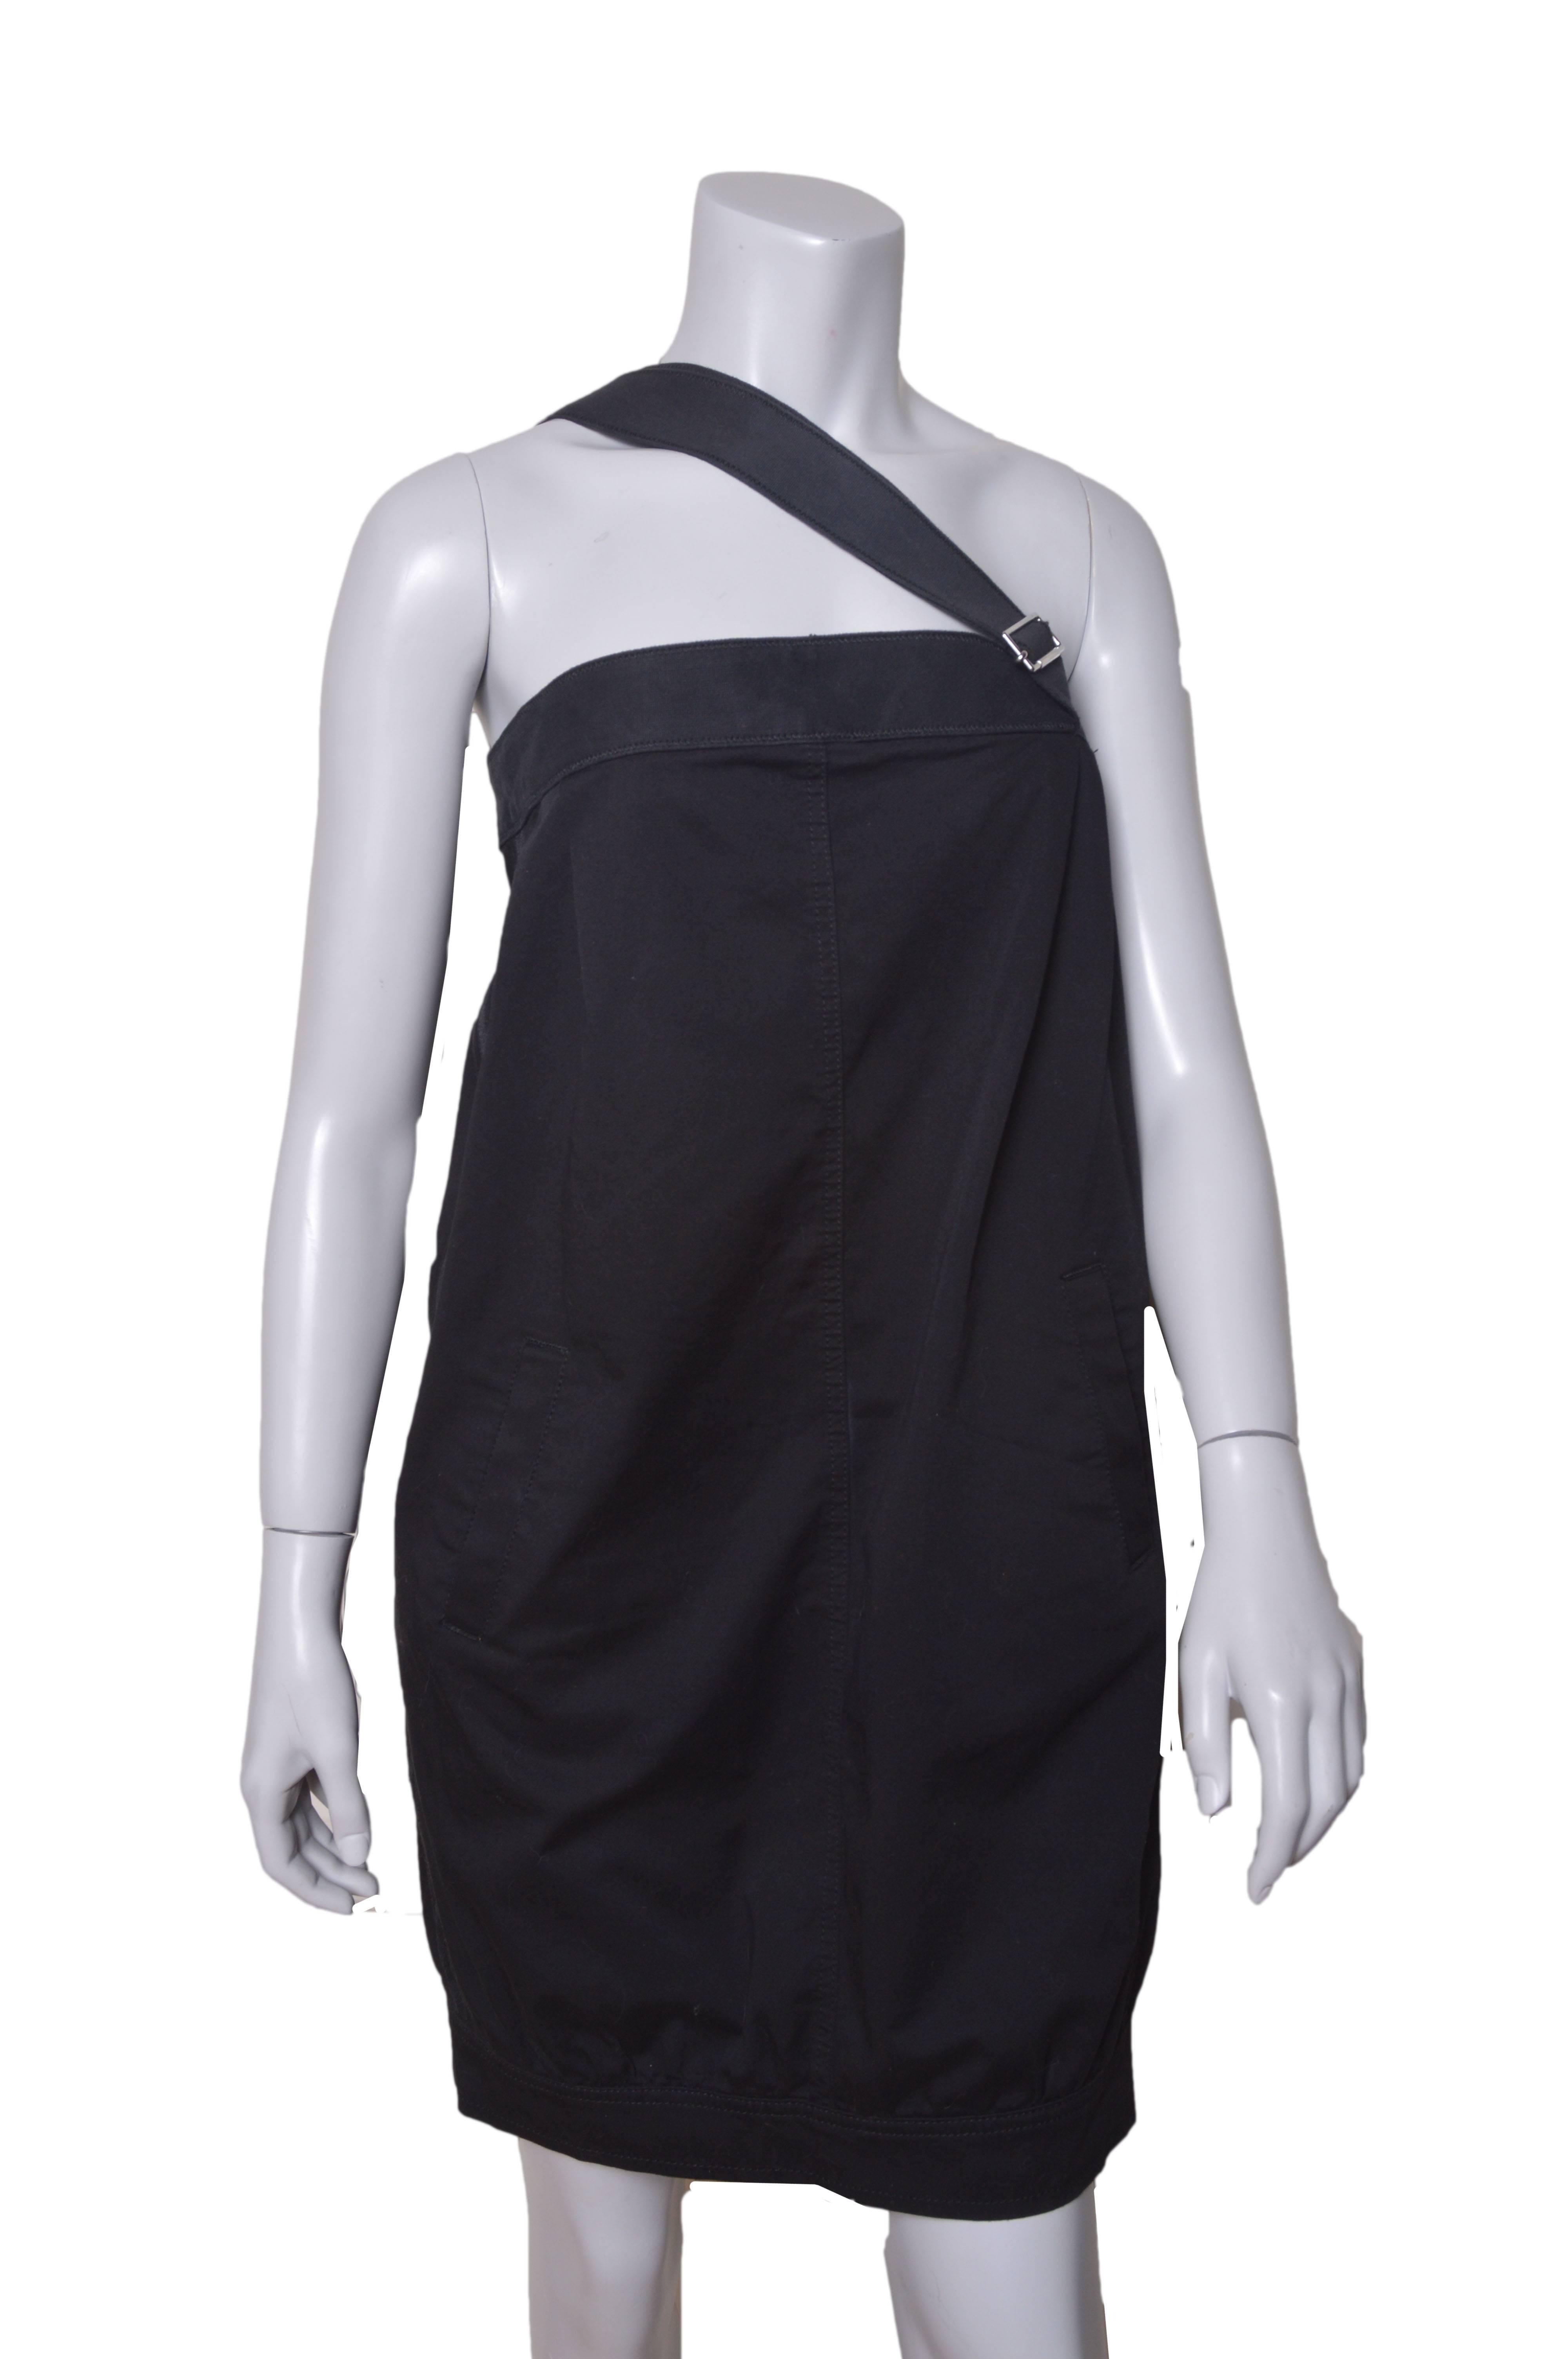 Outstanding Dolce & Gabanna dress.
Adjustable wide strap that crosses over shoulder.
Structured mid-weight cotton.
Banded bust and hem.
Dress has slight bubble shape.
Front pleating and two slant pockets.
Back zipper and two patch